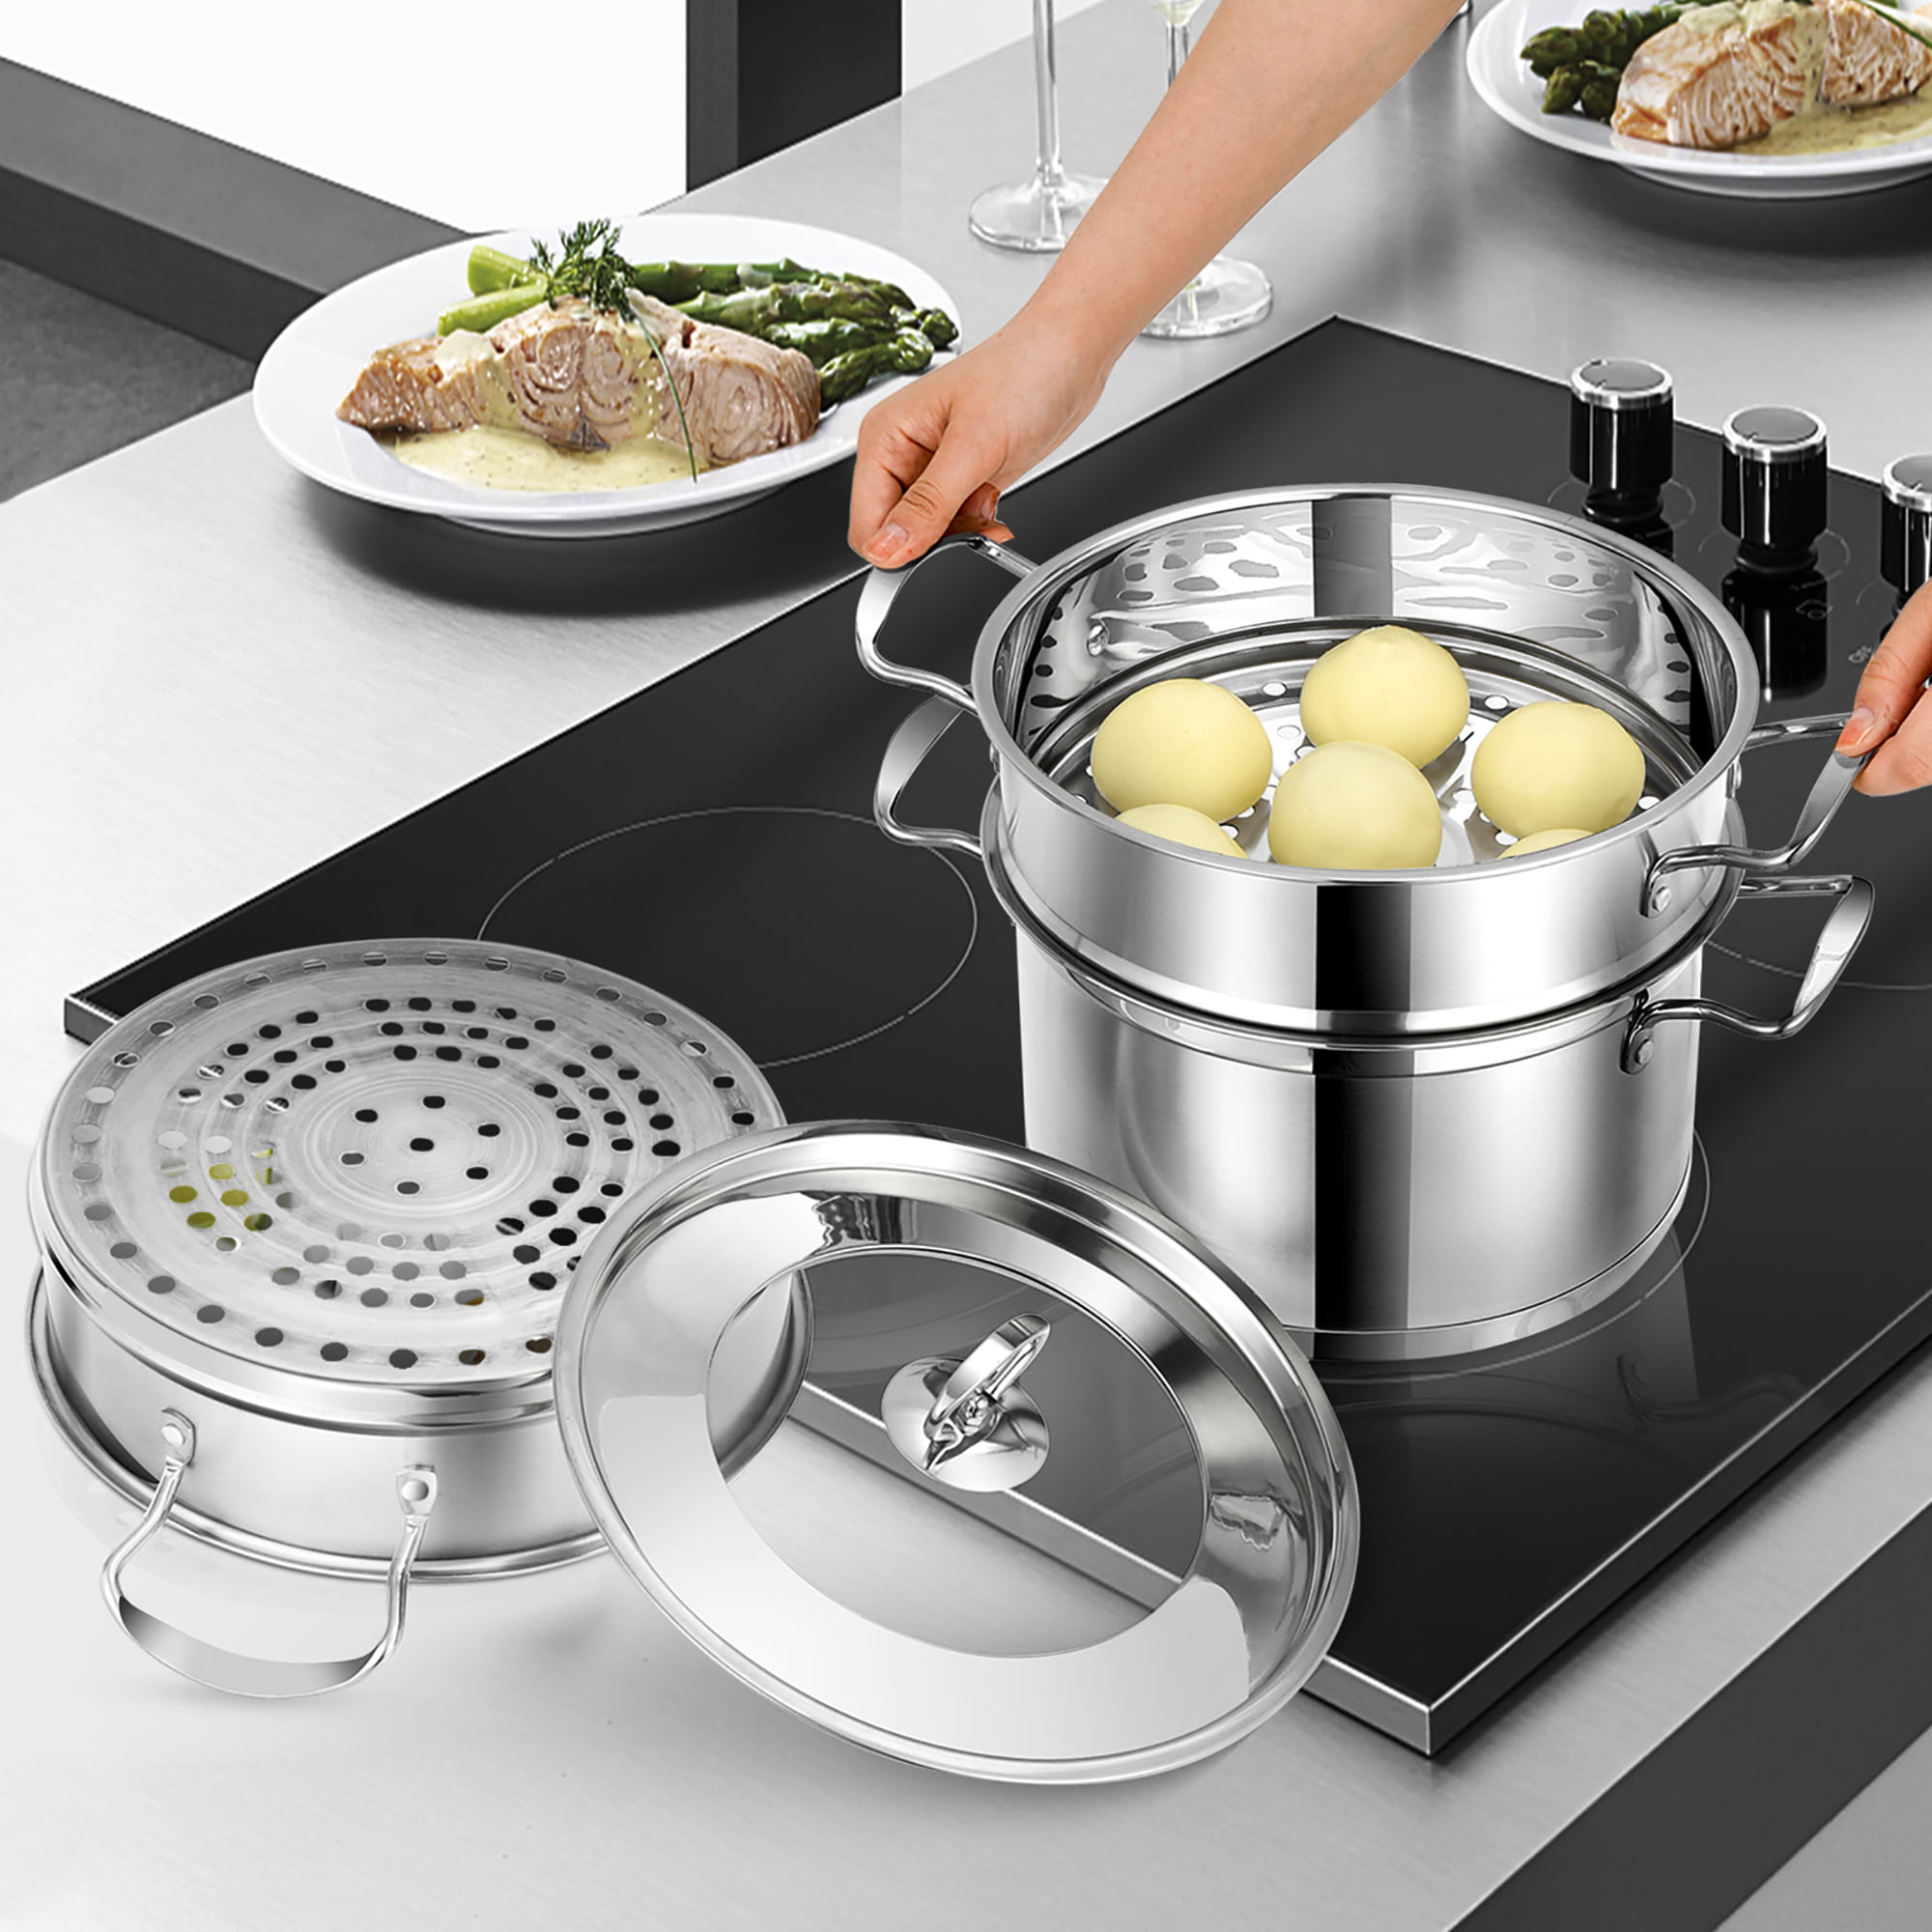 Costway 2-Tier Steamer Pot 304 Stainless Steel Steaming Cookware w/ Glass Lid, Silver 86275723